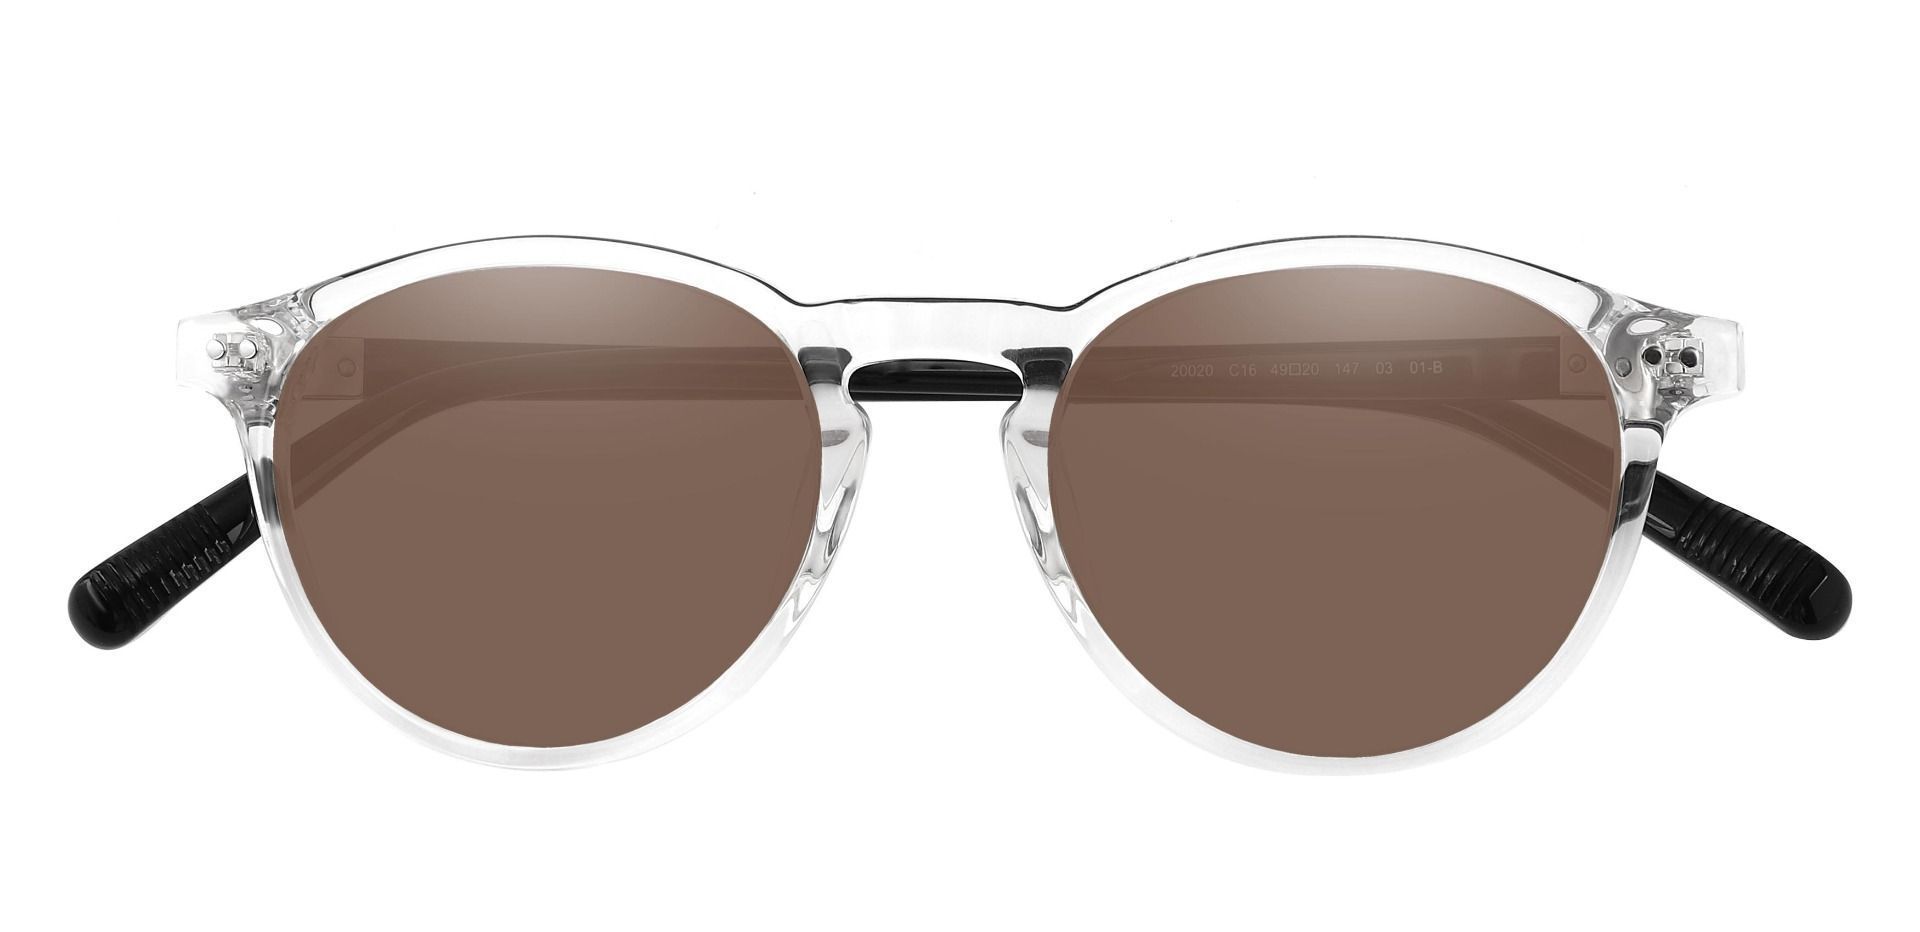 Monarch Oval Progressive Sunglasses - Clear Frame With Brown Lenses